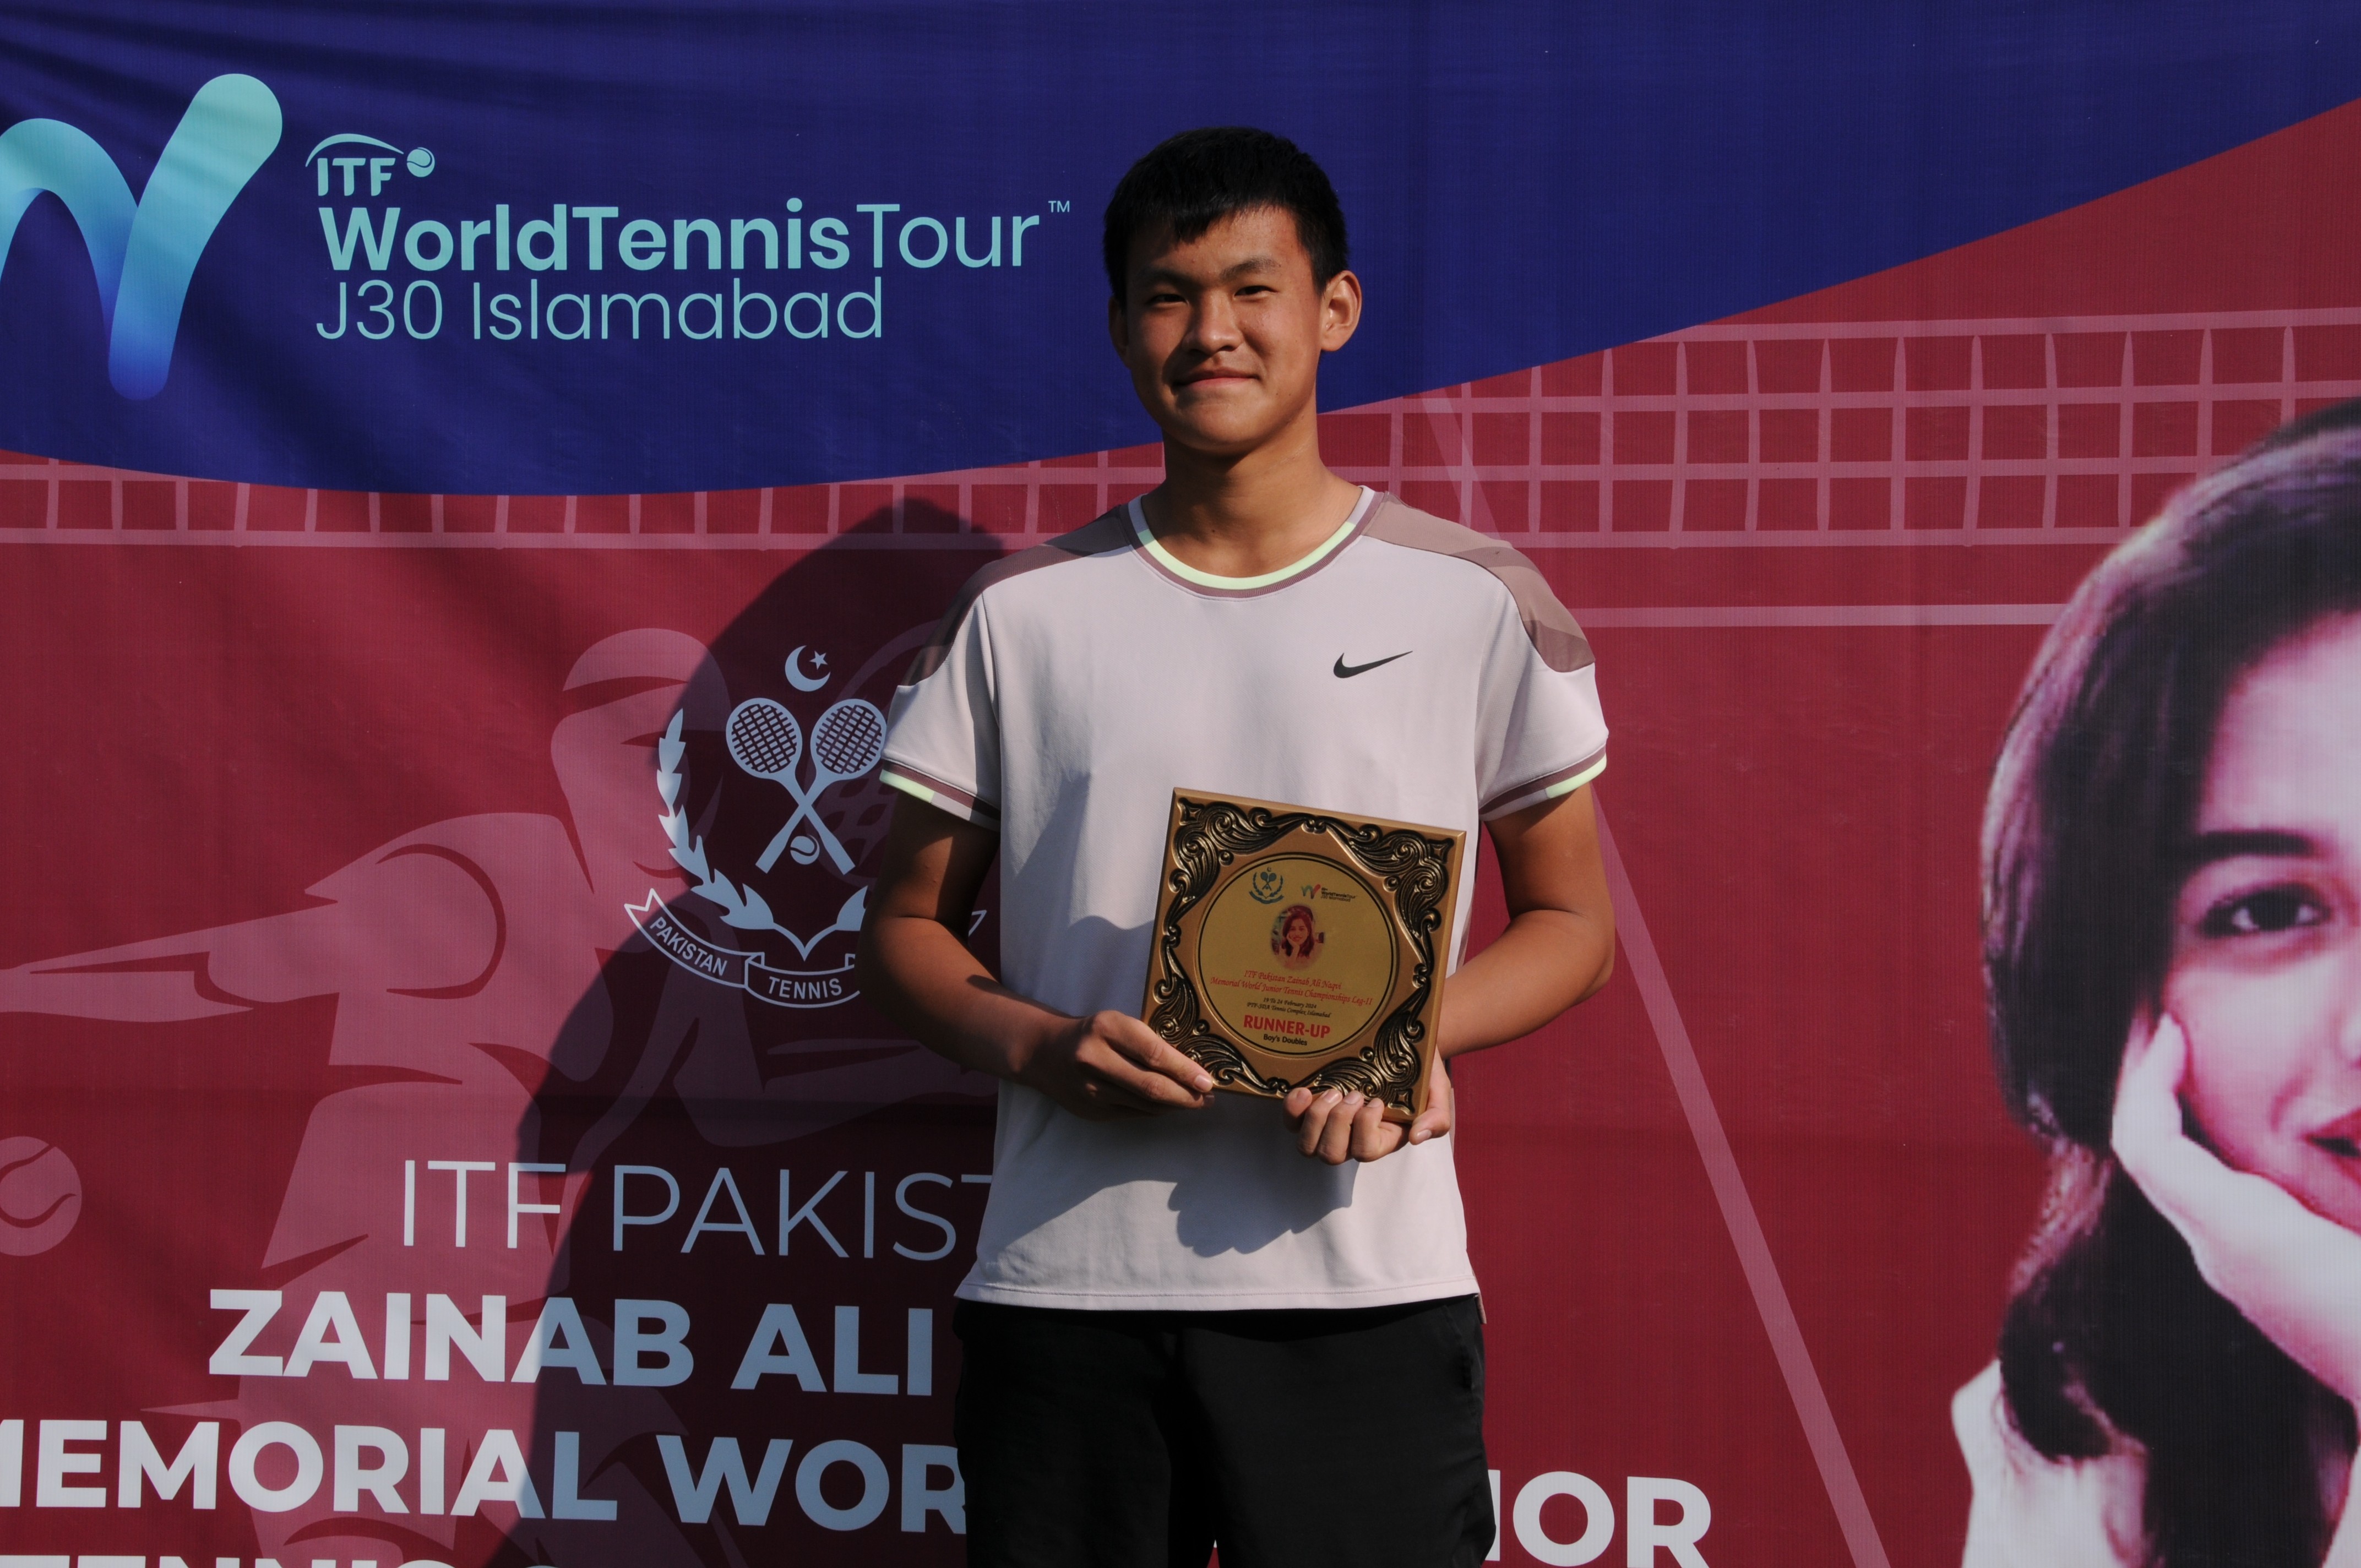 A winning tennis player posing with his trophy